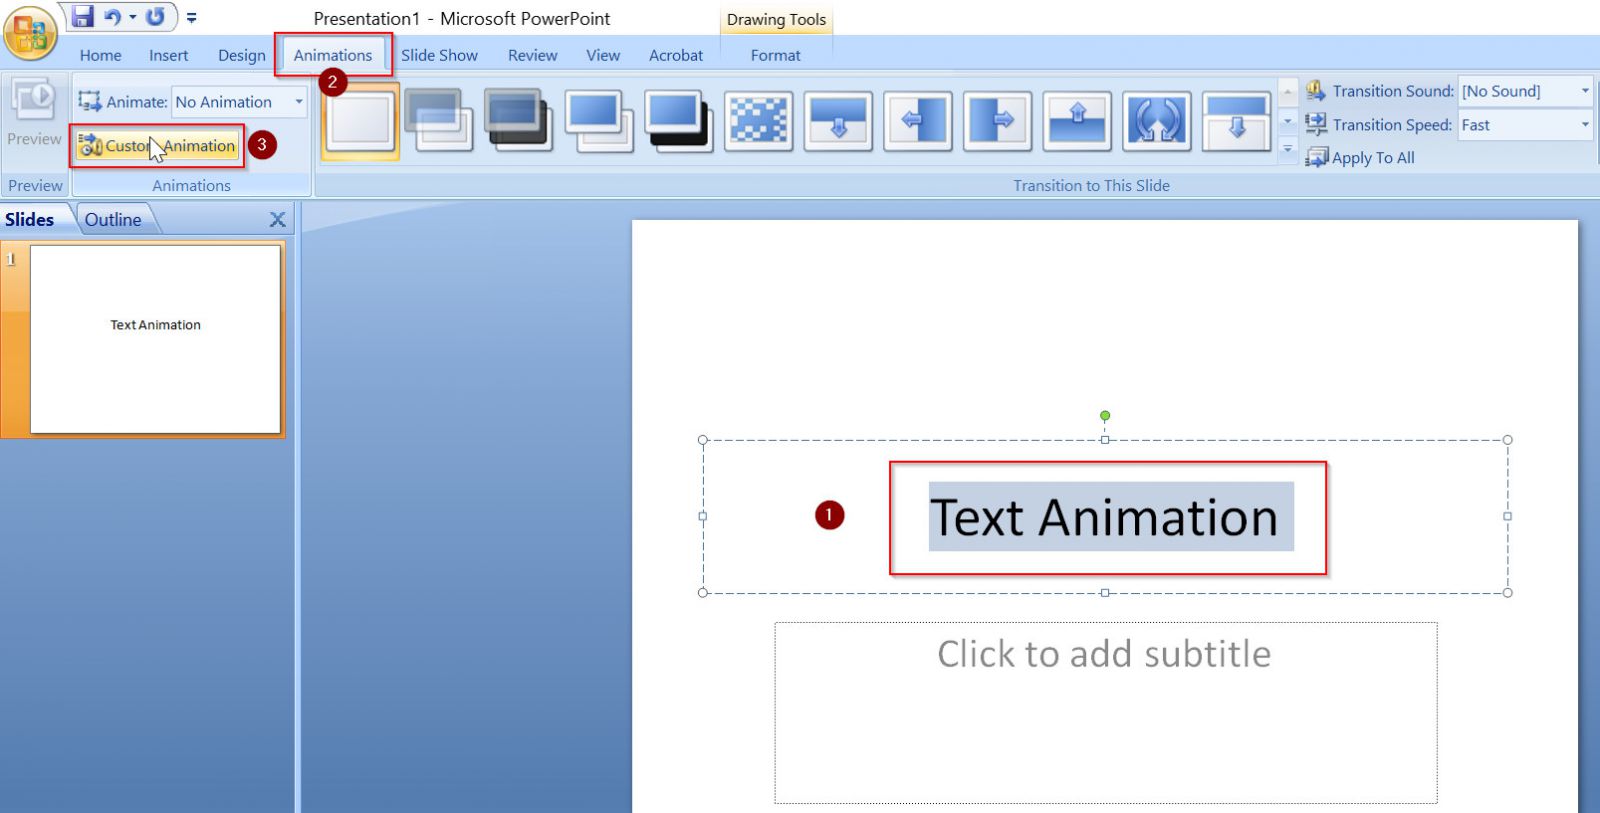 How to Apply Custom Animation in Powerpoint?